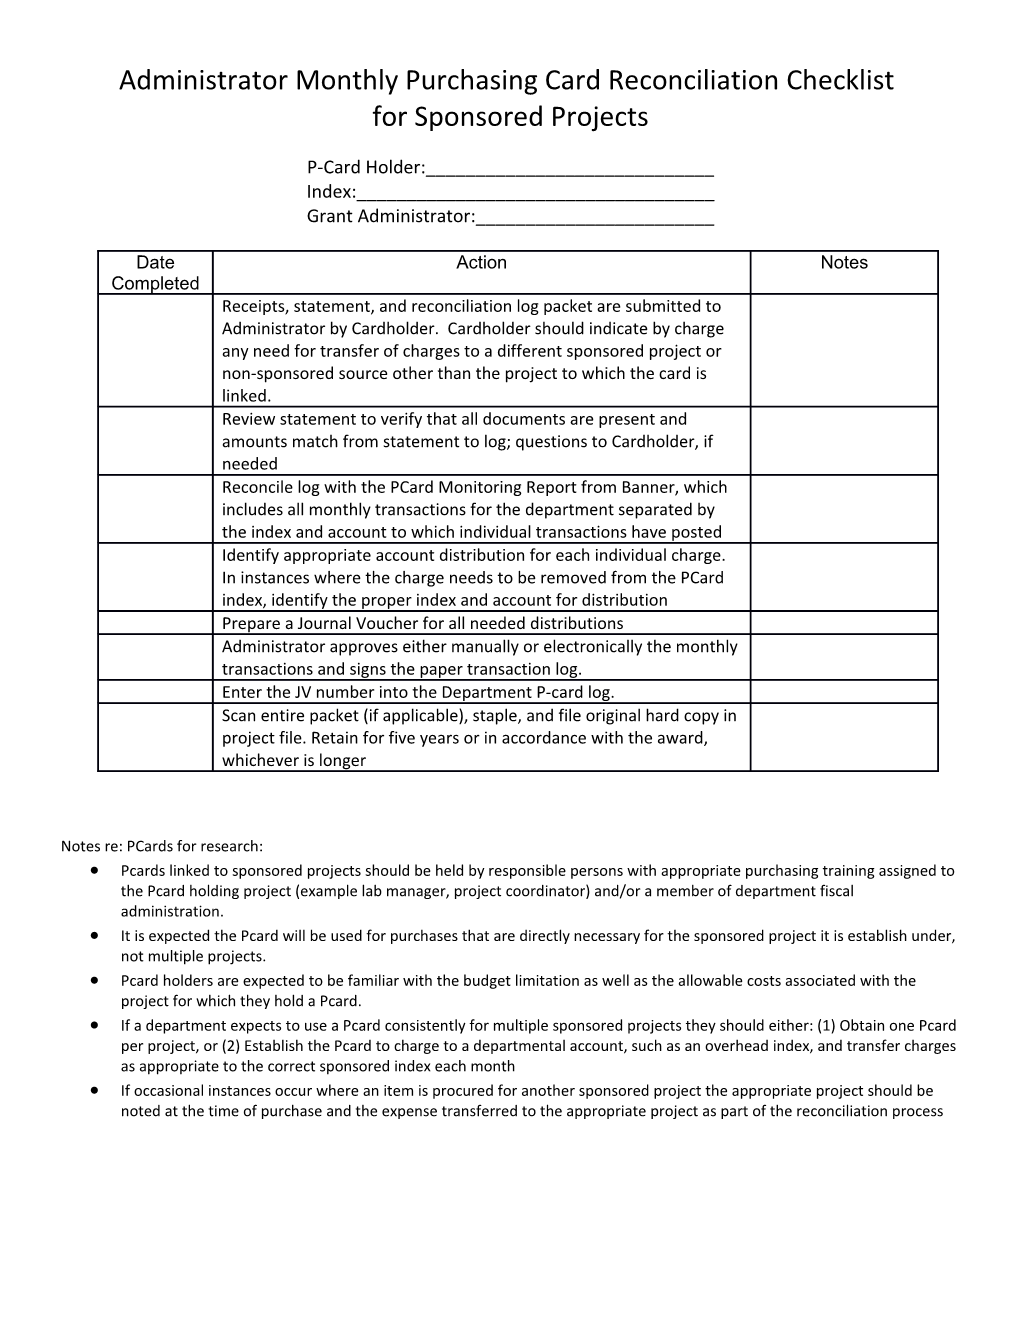 Administrator Monthly Purchasing Card Reconciliation Checklist